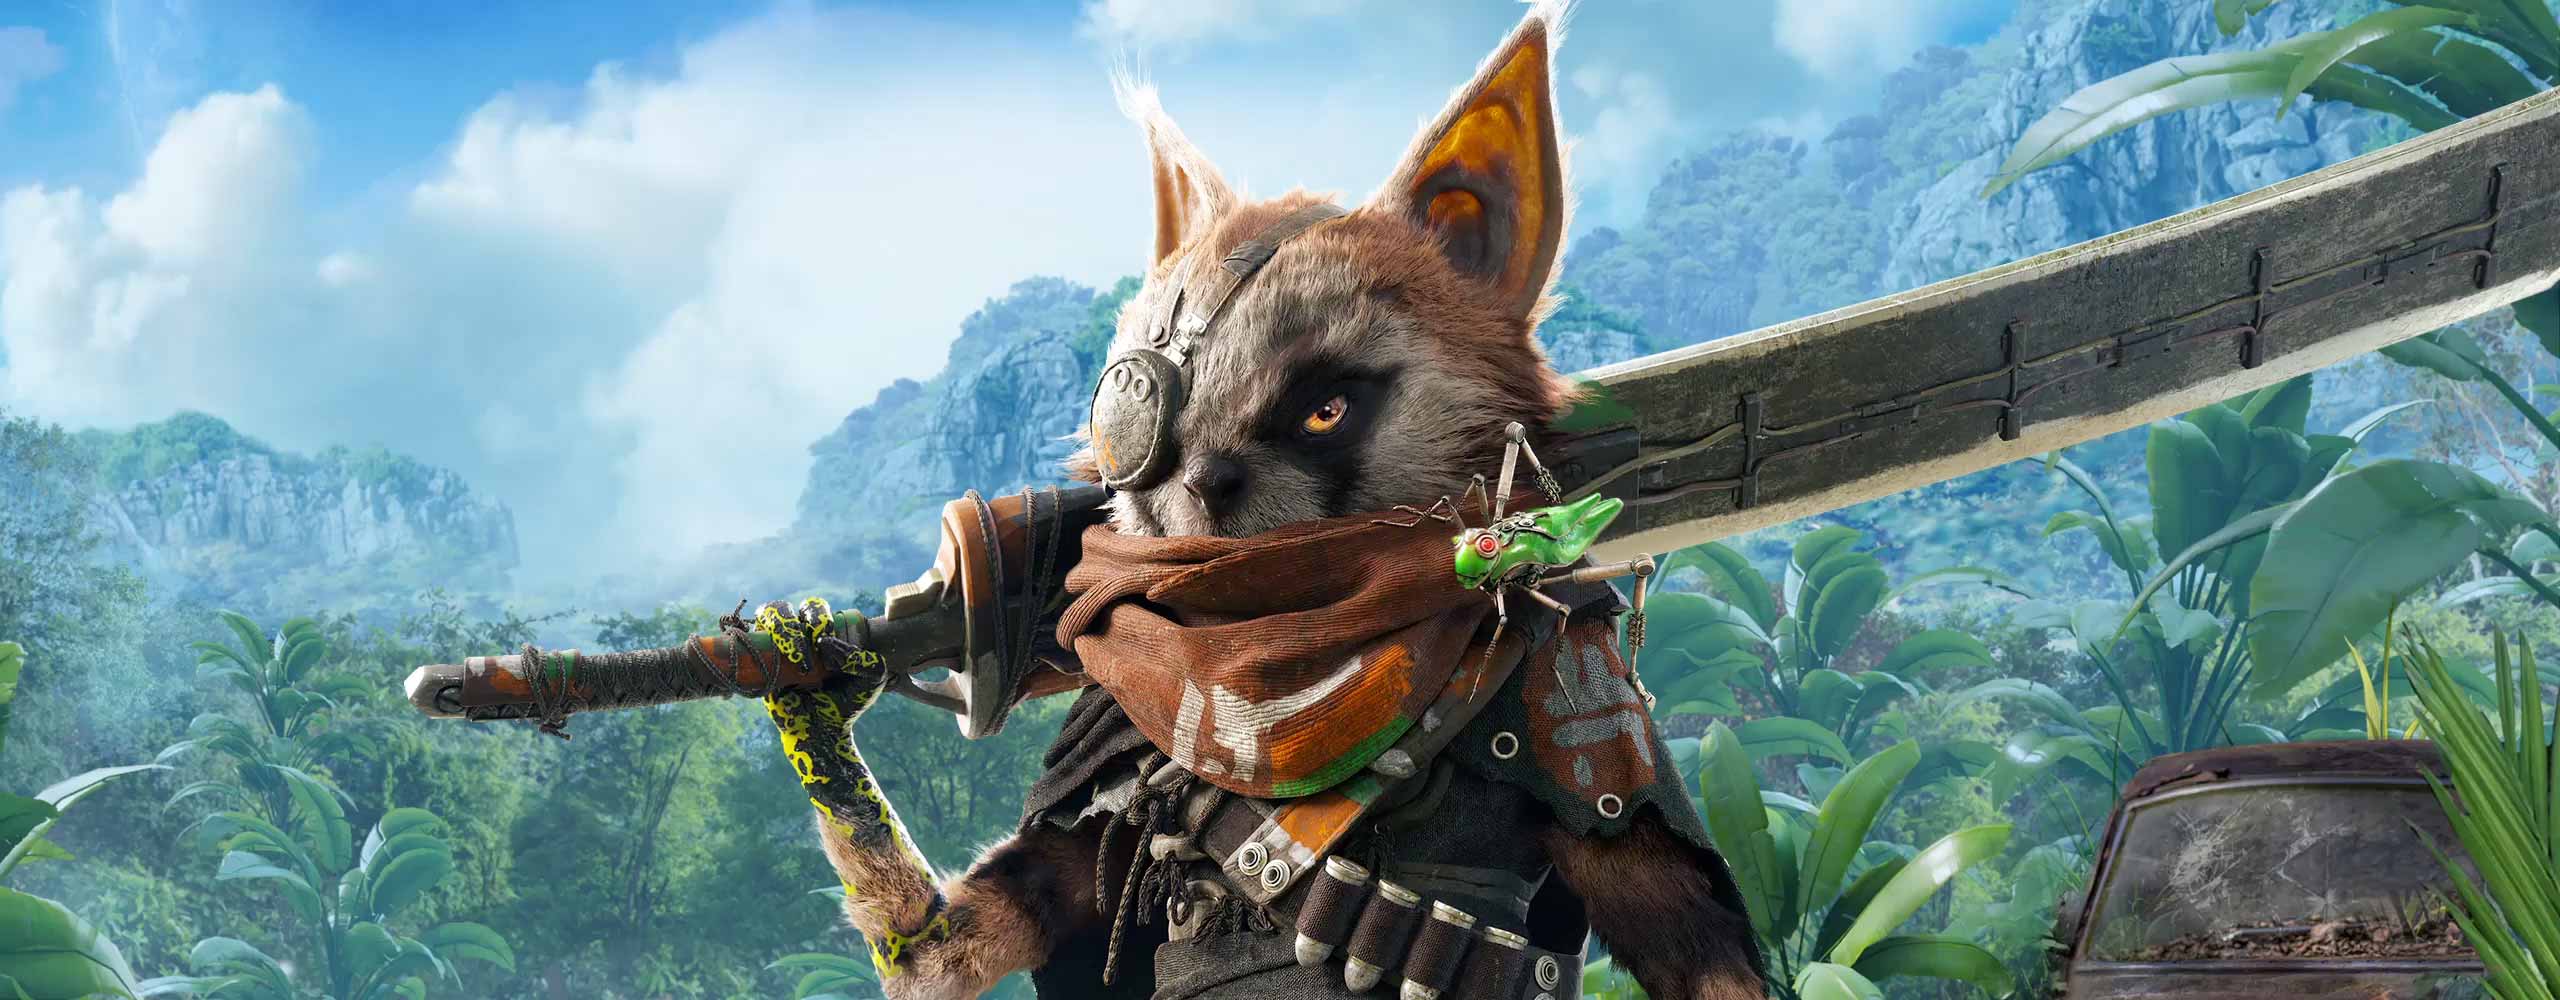 Image for Should you buy Biomutant? Review impressions